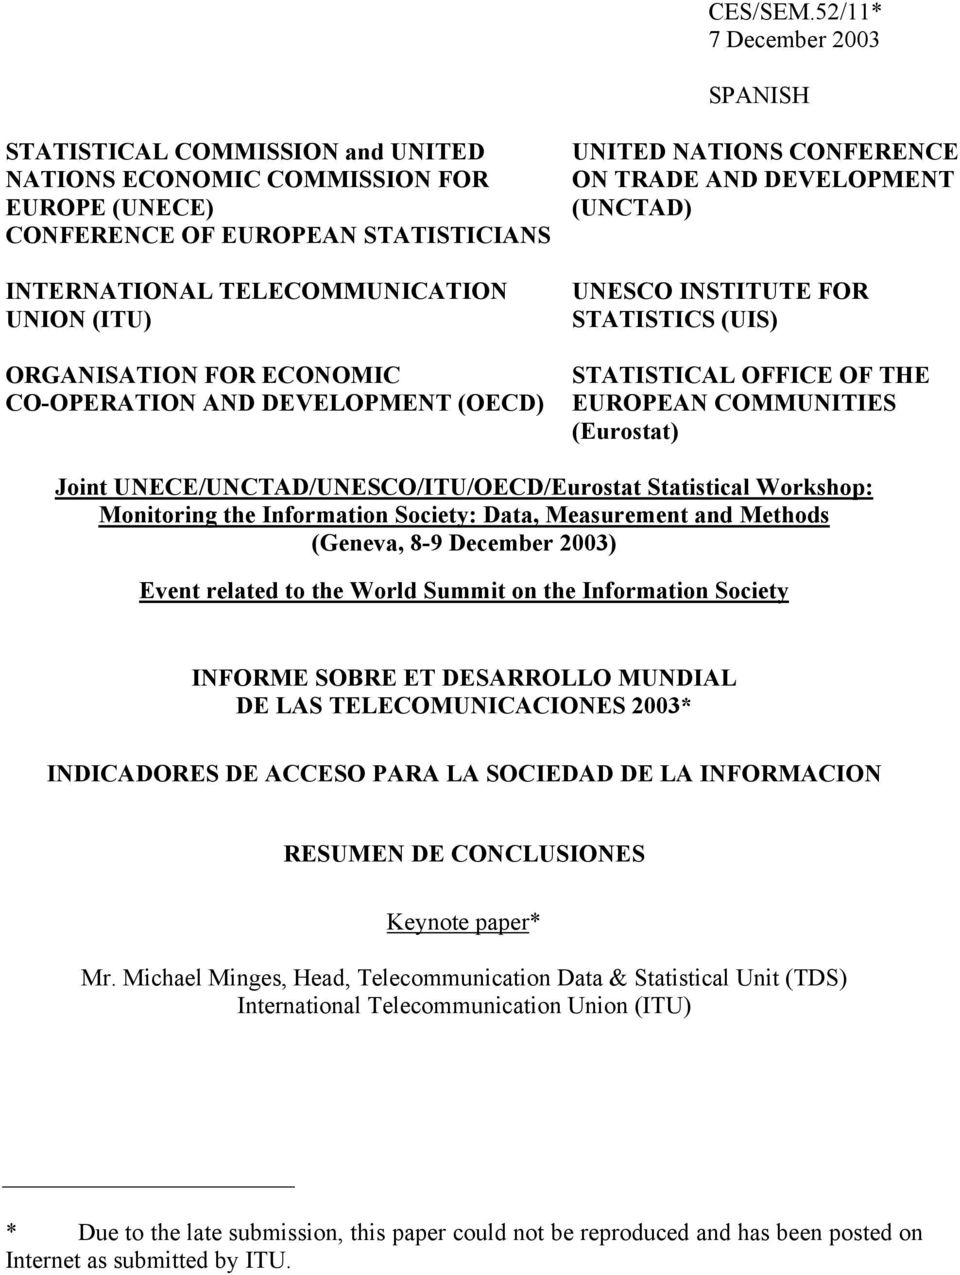 ORGANISATION FOR ECONOMIC CO-OPERATION AND DEVELOPMENT (OECD) UNITED NATIONS CONFERENCE ON TRADE AND DEVELOPMENT (UNCTAD) UNESCO INSTITUTE FOR STATISTICS (UIS) STATISTICAL OFFICE OF THE EUROPEAN